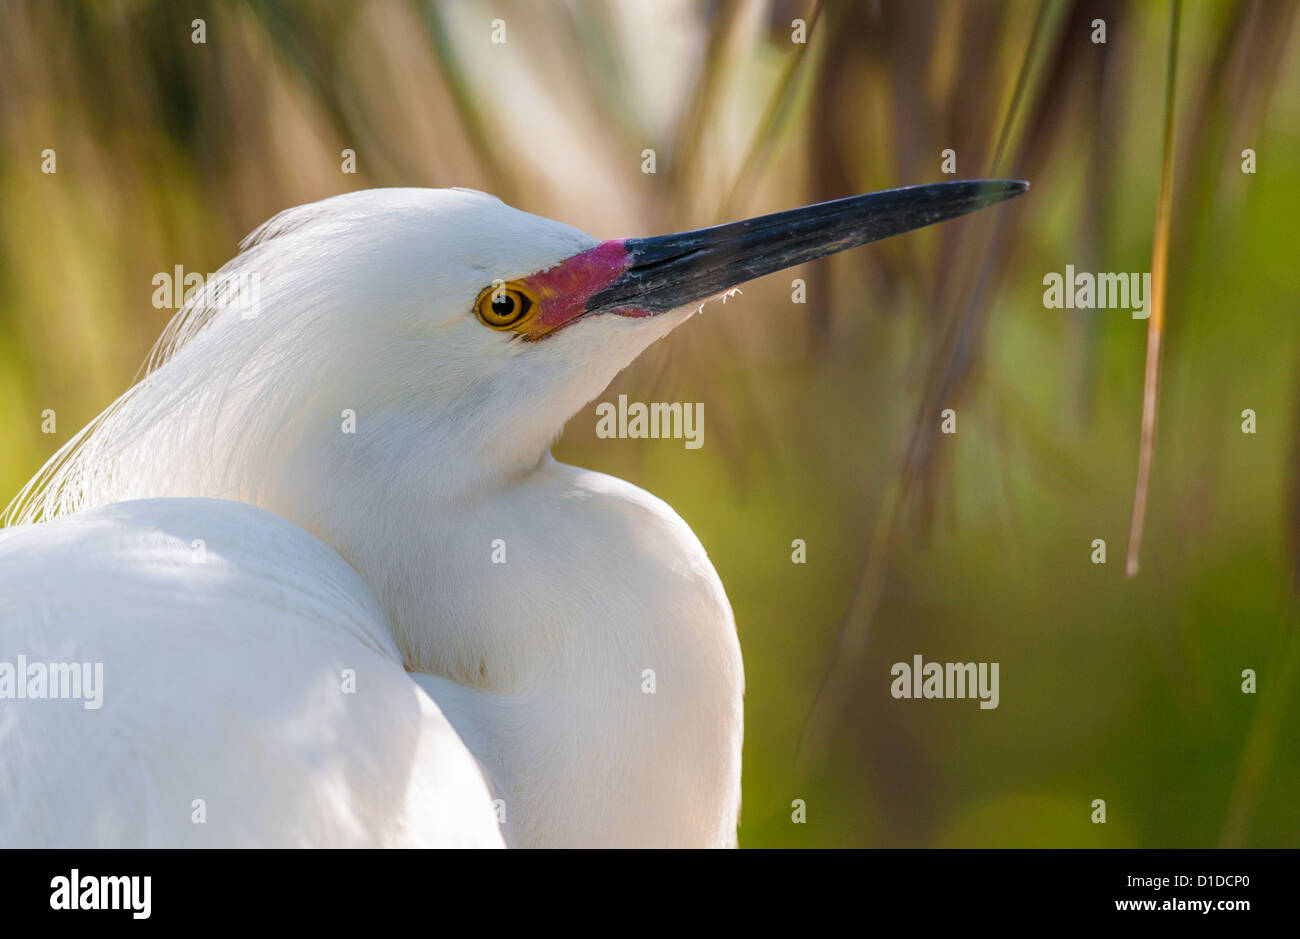 Snowy Egret (Egretta thula) with plumage perched on tree in St. Augustine Alligator Farm Zoological Park, St. Augustine, Florida Stock Photo